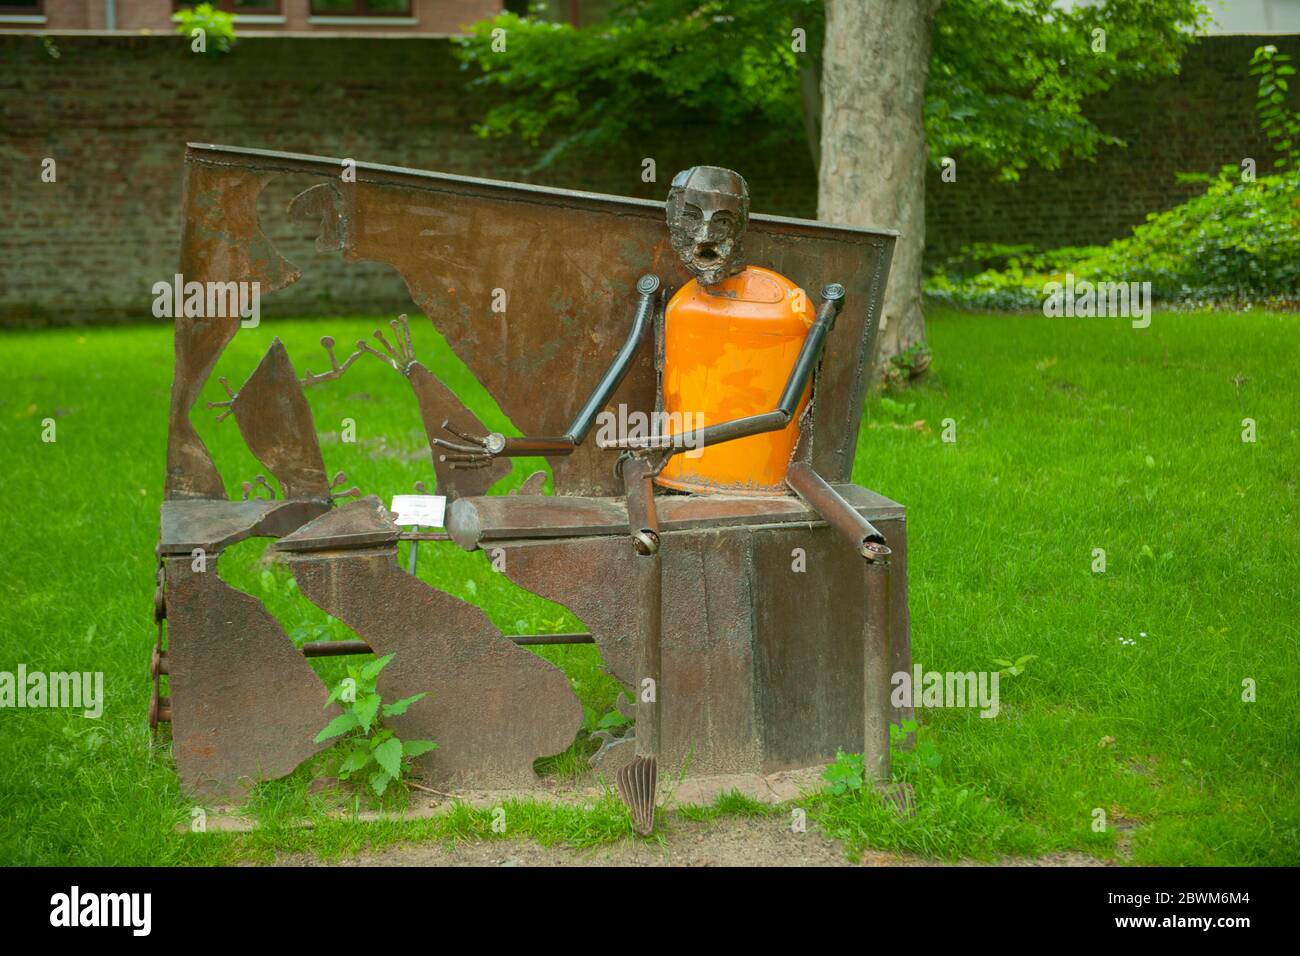 Kunst Im Park High Resolution Stock Photography and Images - Alamy